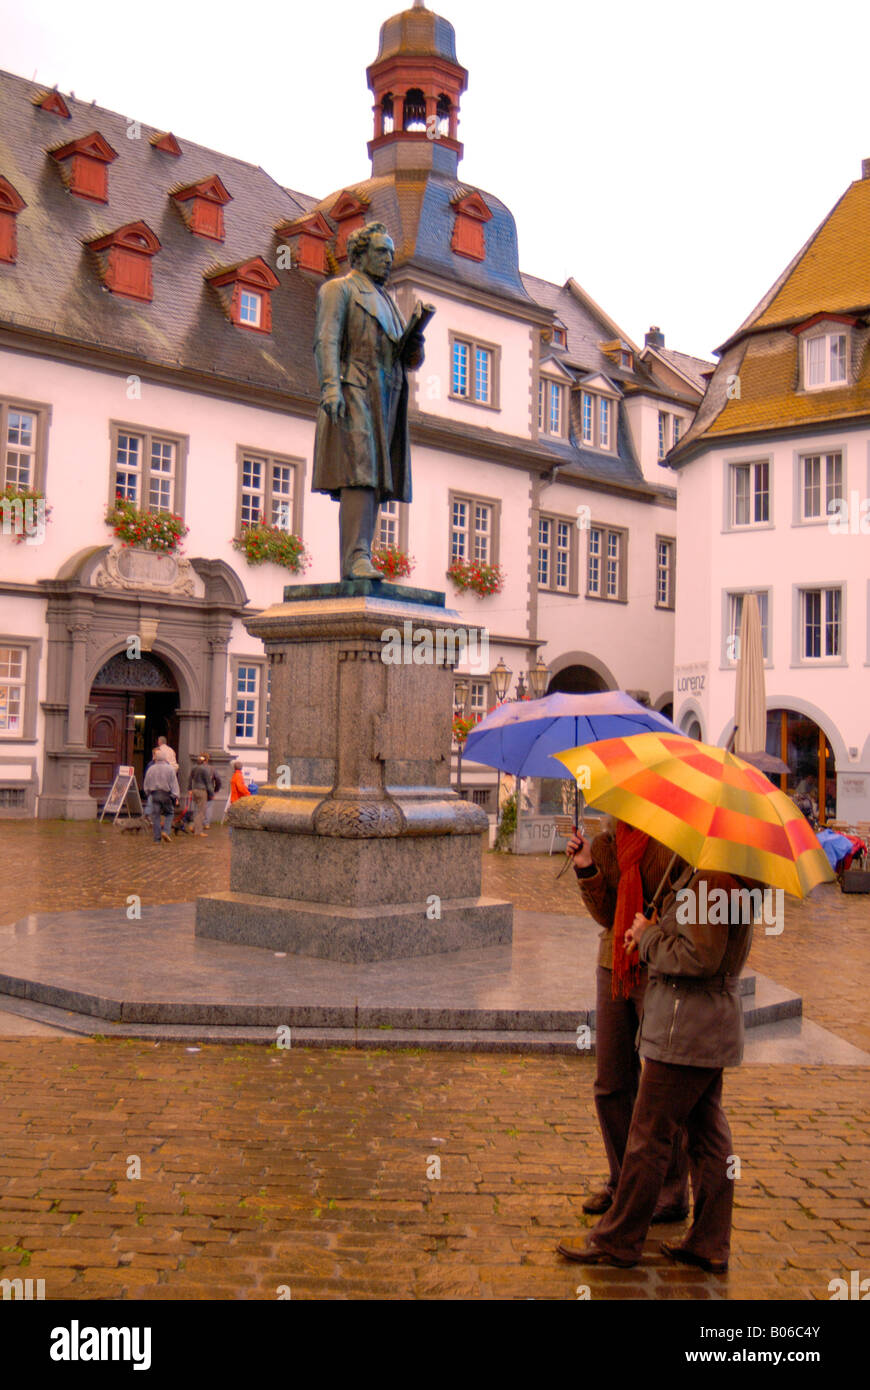 Europe, Germany, Rheinland-Pfalz, Koblenz, Old town, Jesuit Square with statue of Johannes Muller 1801-1858 Stock Photo